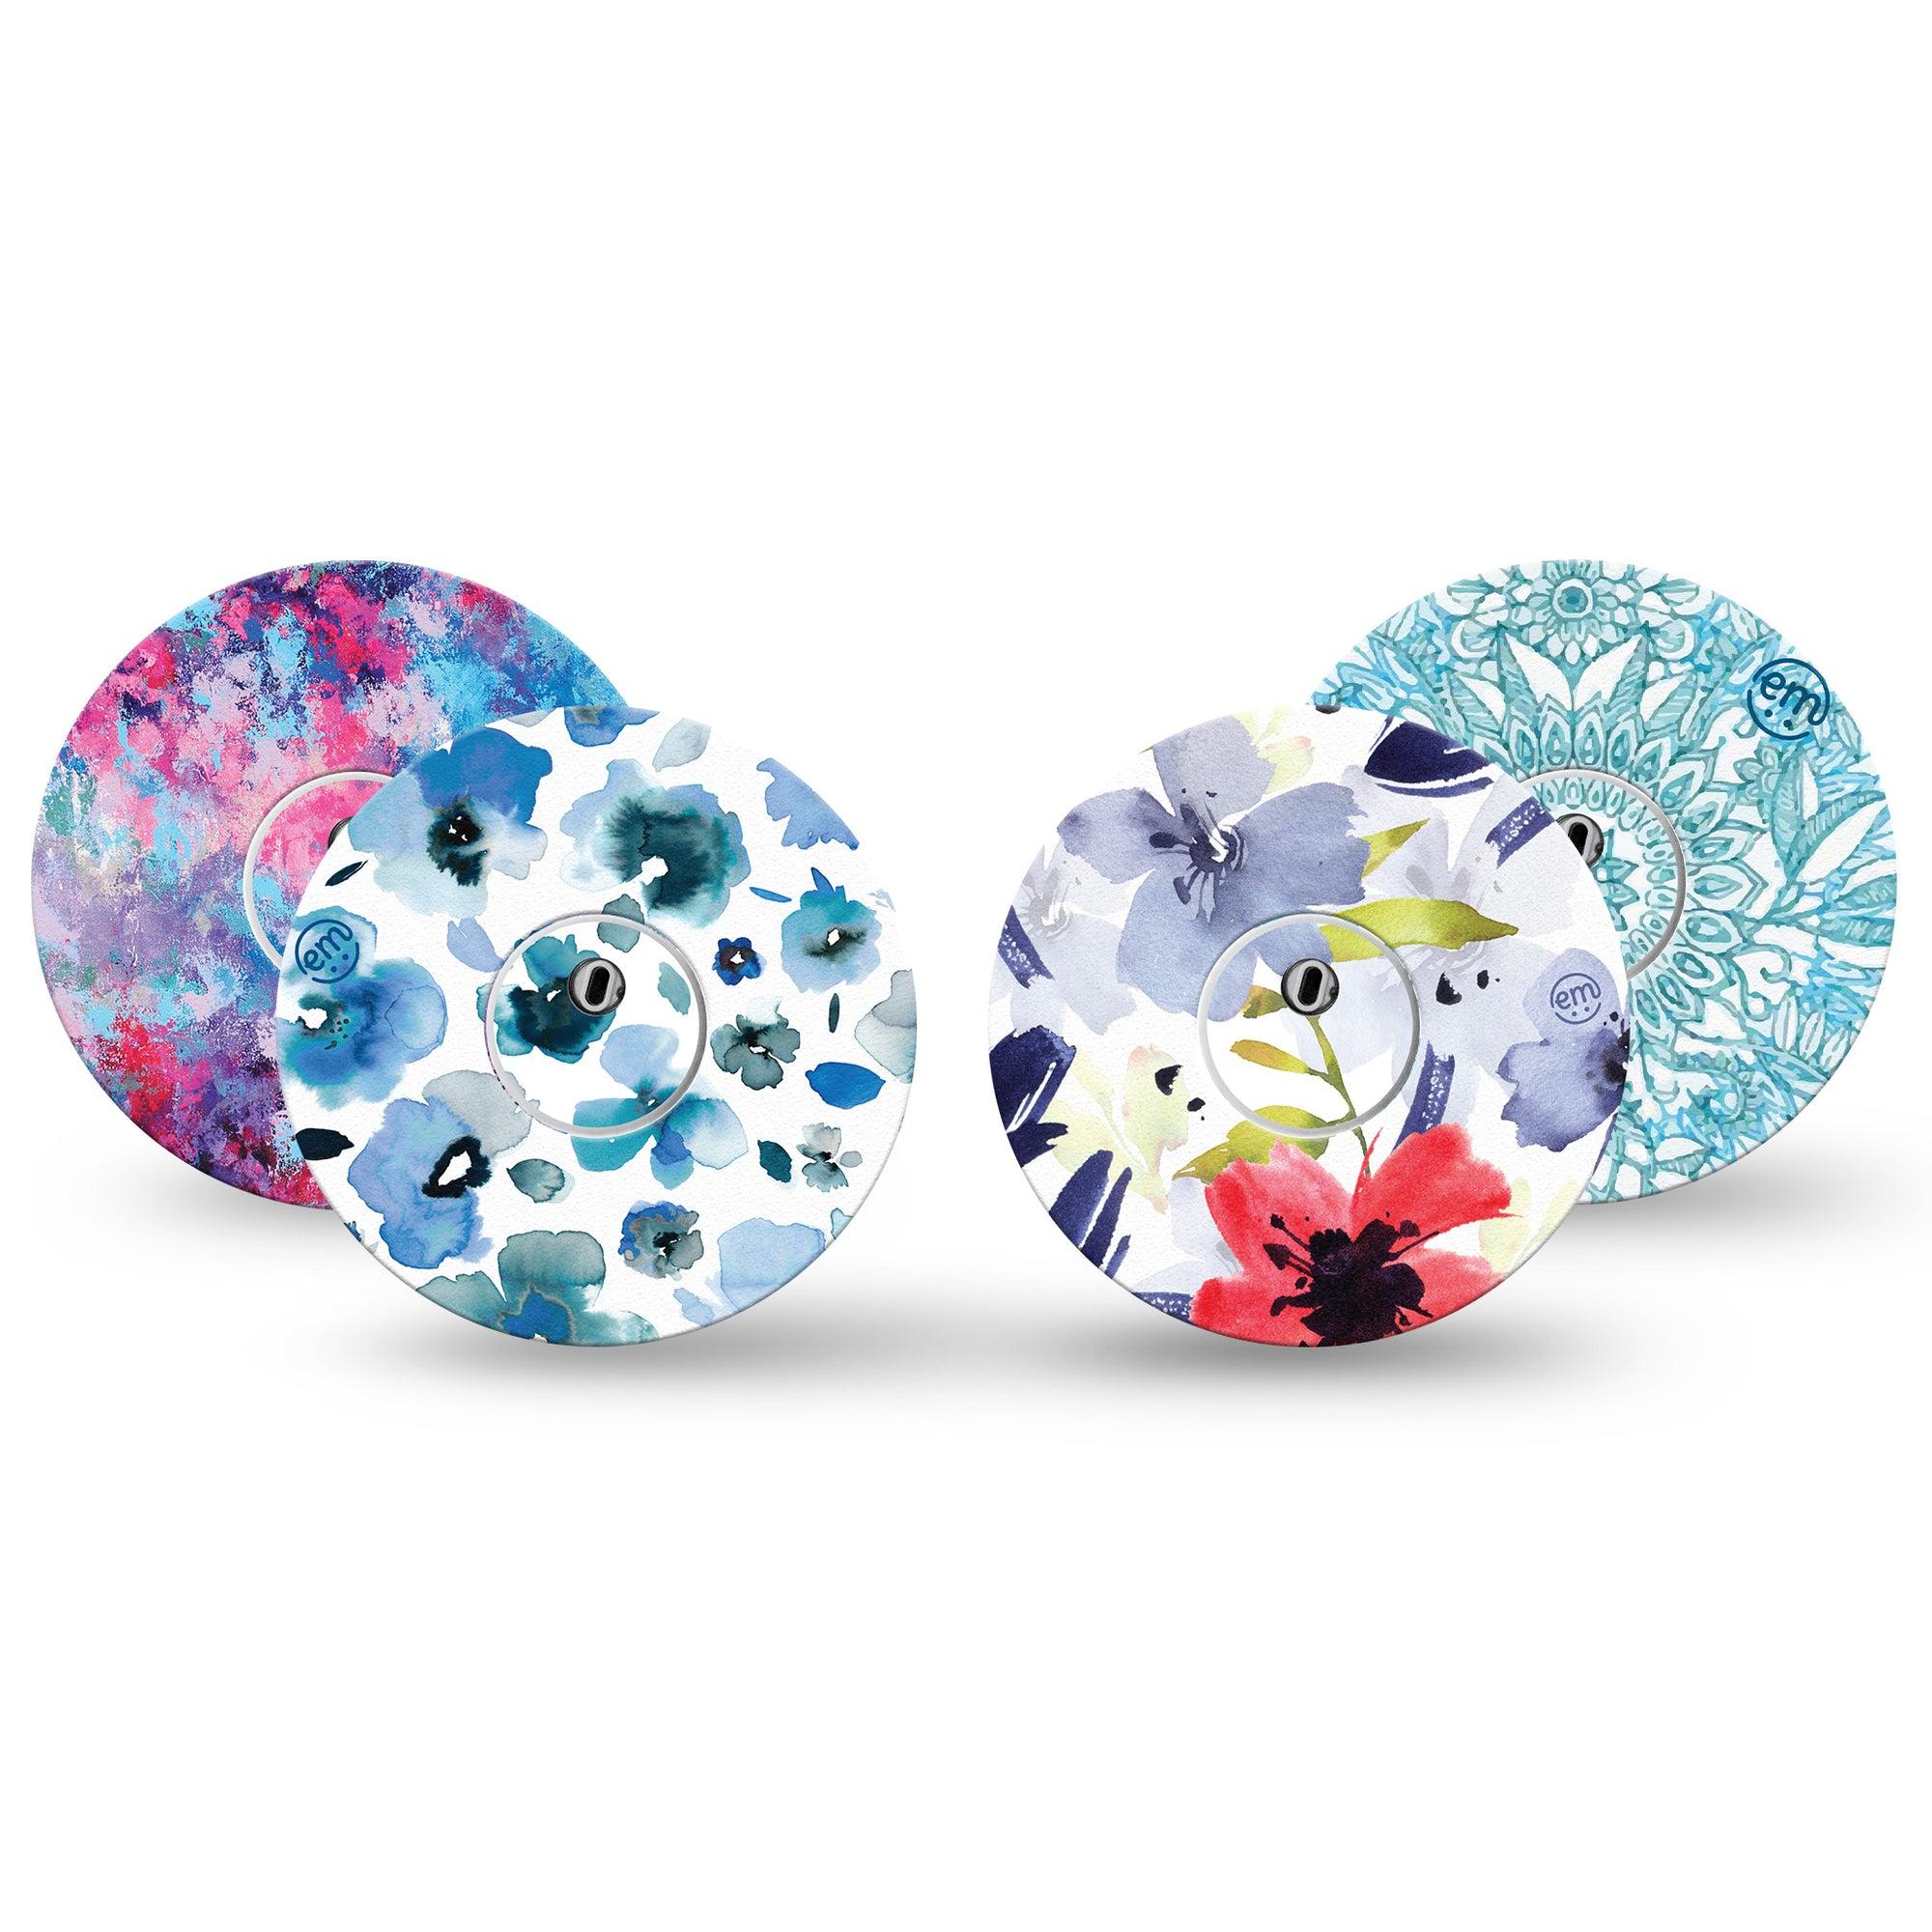 ExpressionMed Blue Blooms Variety Pack Libre 3 Transmitter Sticker, 4-Pack, Bluish Floral Mood Themed, Adhesive Tape and Center Sticker Design